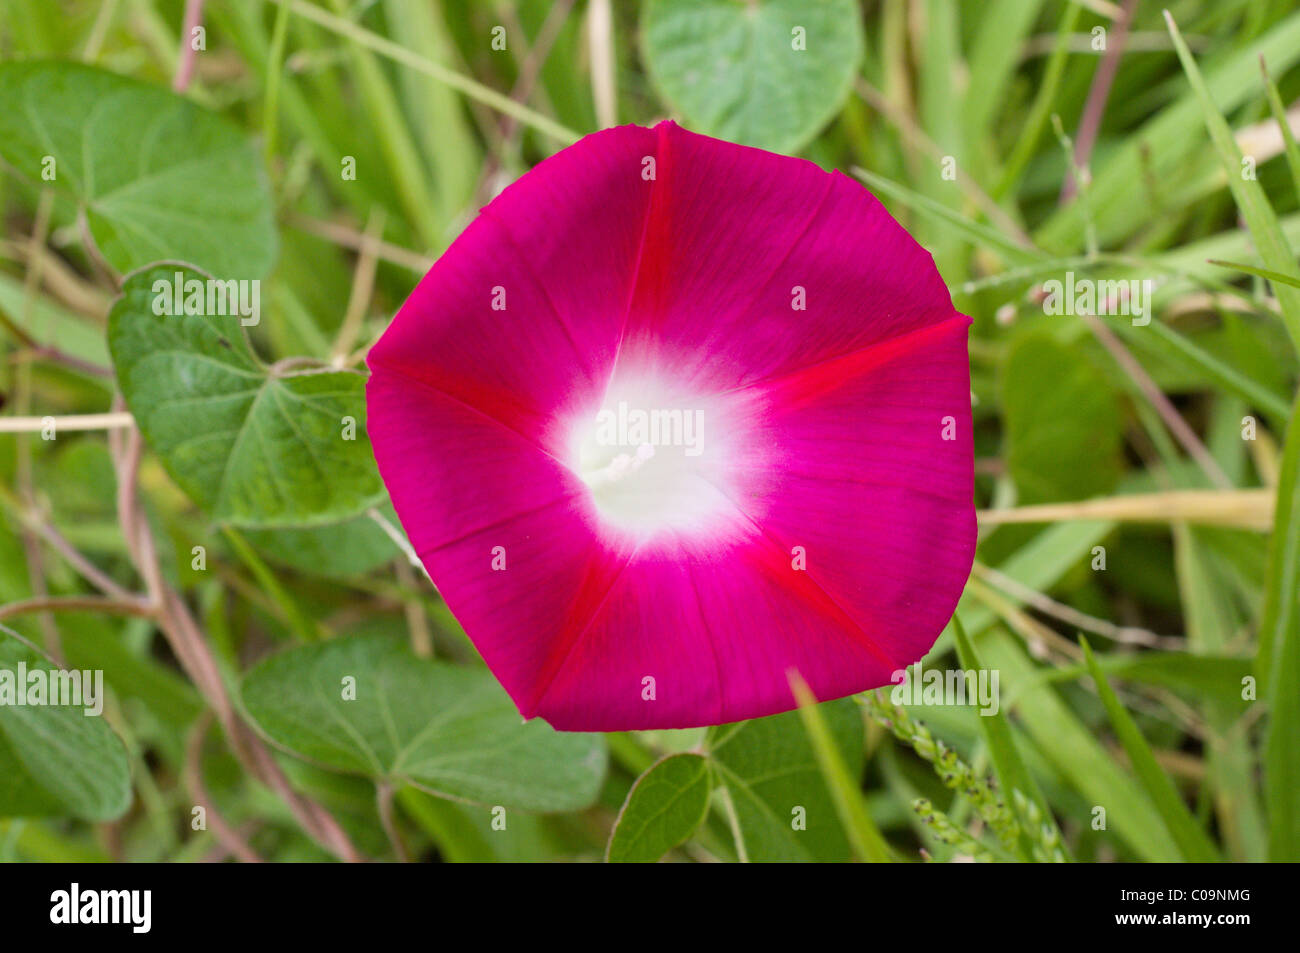 Photo of a Morning glory flower (Ipomoea Violacea) in Mexico Stock Photo